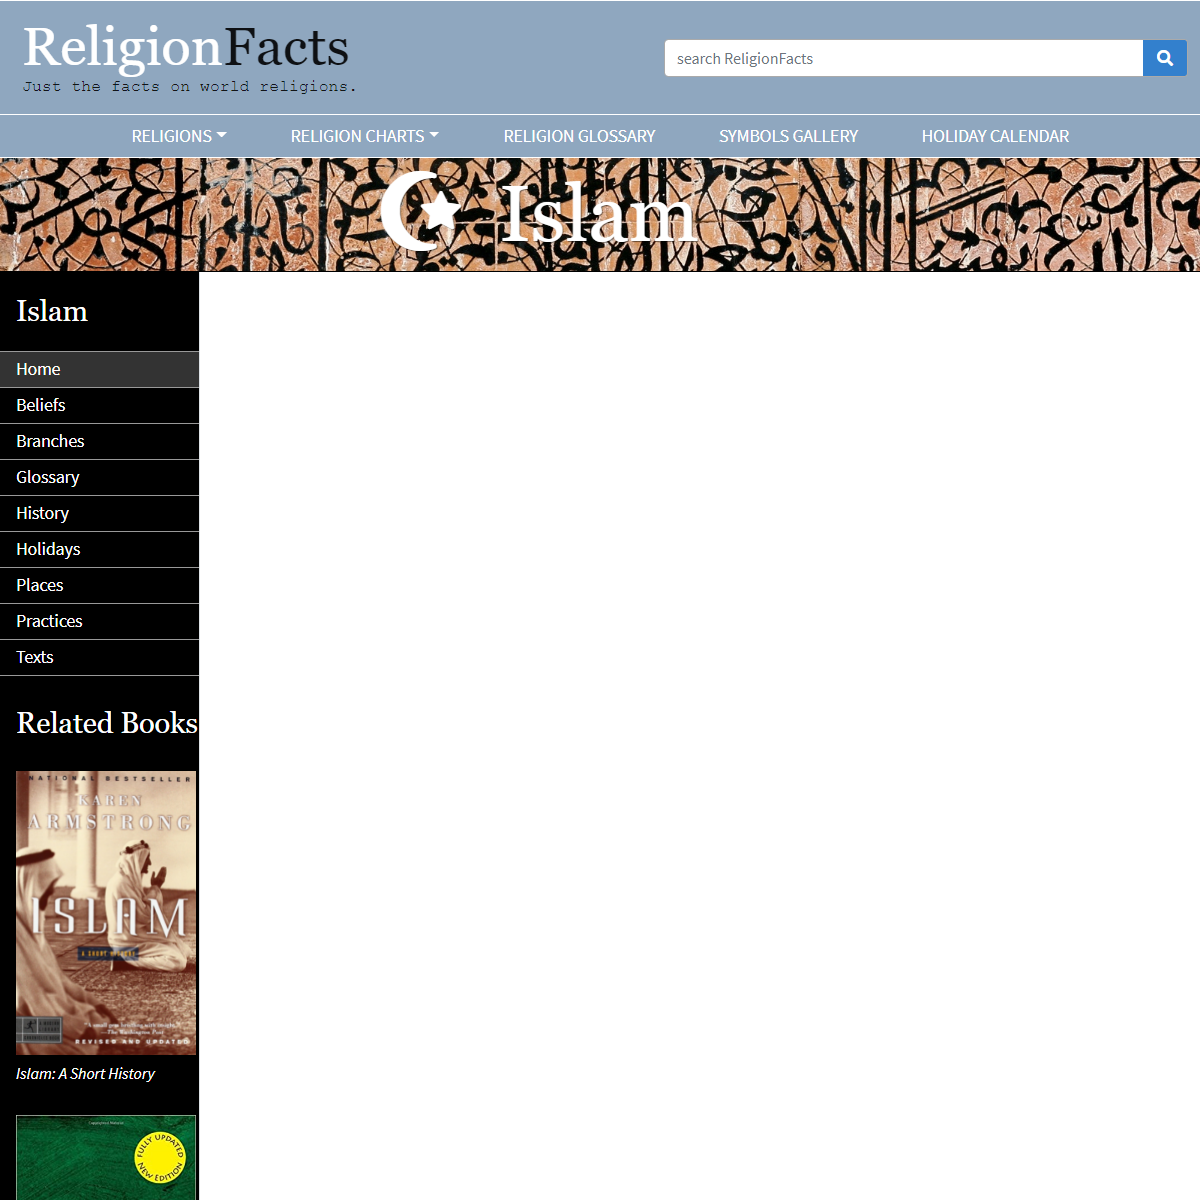 A complete backup of https://religionfacts.com/islam